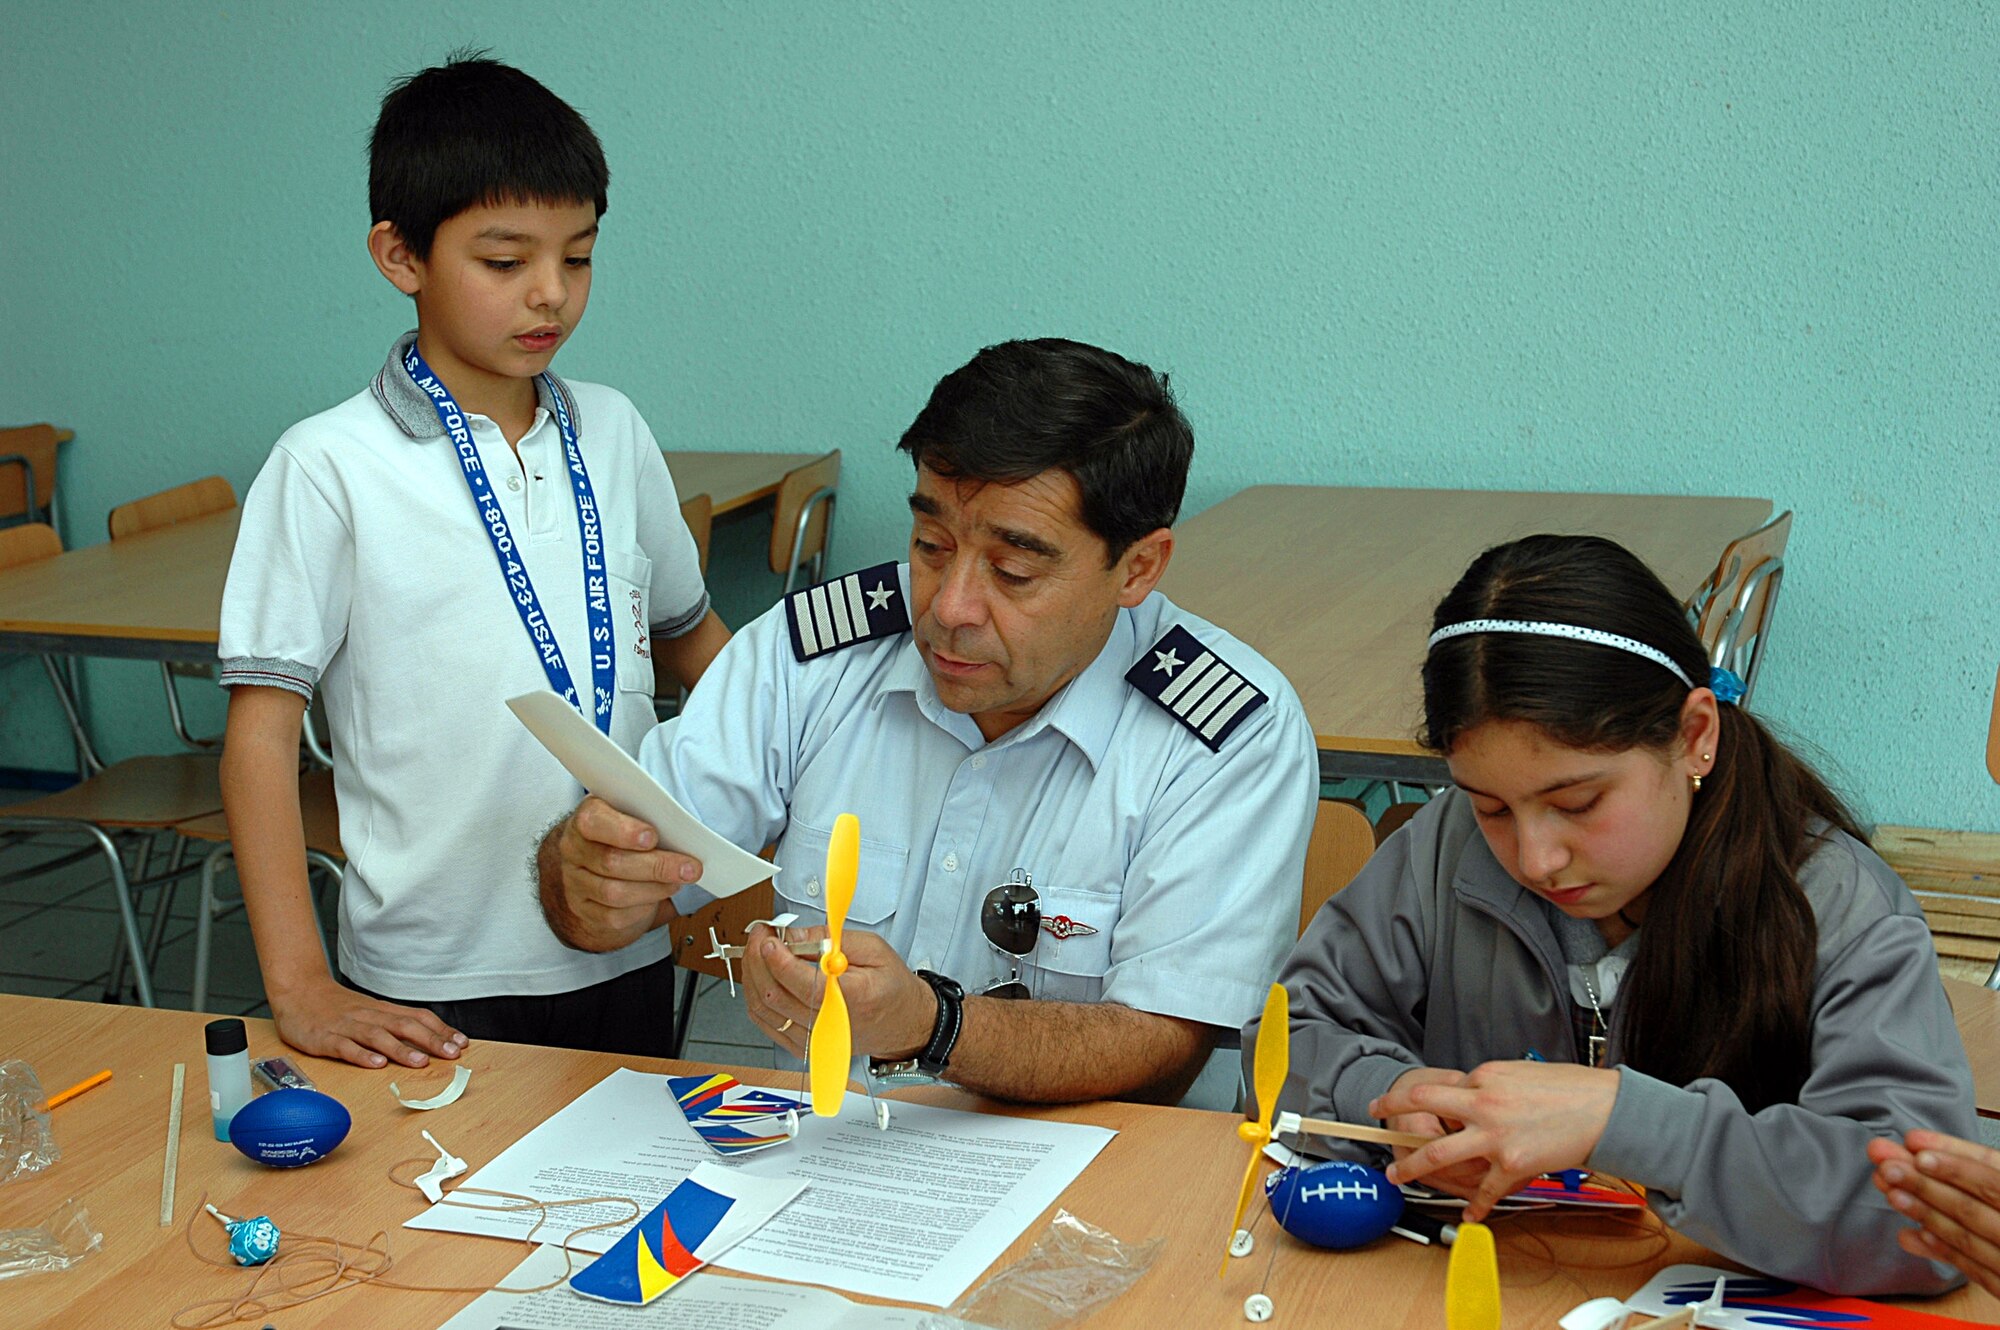 Col. Duncan Silva, Chilean air force director of public affairs, demonstrates model building Oct. 27 to Chilean children during an afterschool science program. The Chilean air force teamed up with members of Air Forces Southern, U.S. Embassy and Military Group, along with civilian volunteers from the Santa Clara, Calif.-based technology firm Agilent Technologies. The event is part of community outreach efforts complementing Operation Southern Partner, an AFSOUTH-led event aimed at providing intensive, periodic subject matter exchanges with partner nations in the U.S. Southern Command area of focus.  The all-new program features more than 70 U.S. Air Force subject matter experts from about 25 career fields working alongside partner nation military members in similar career specialties during week-long exchanges. (U.S. Embassy photo/Jose Nuños)